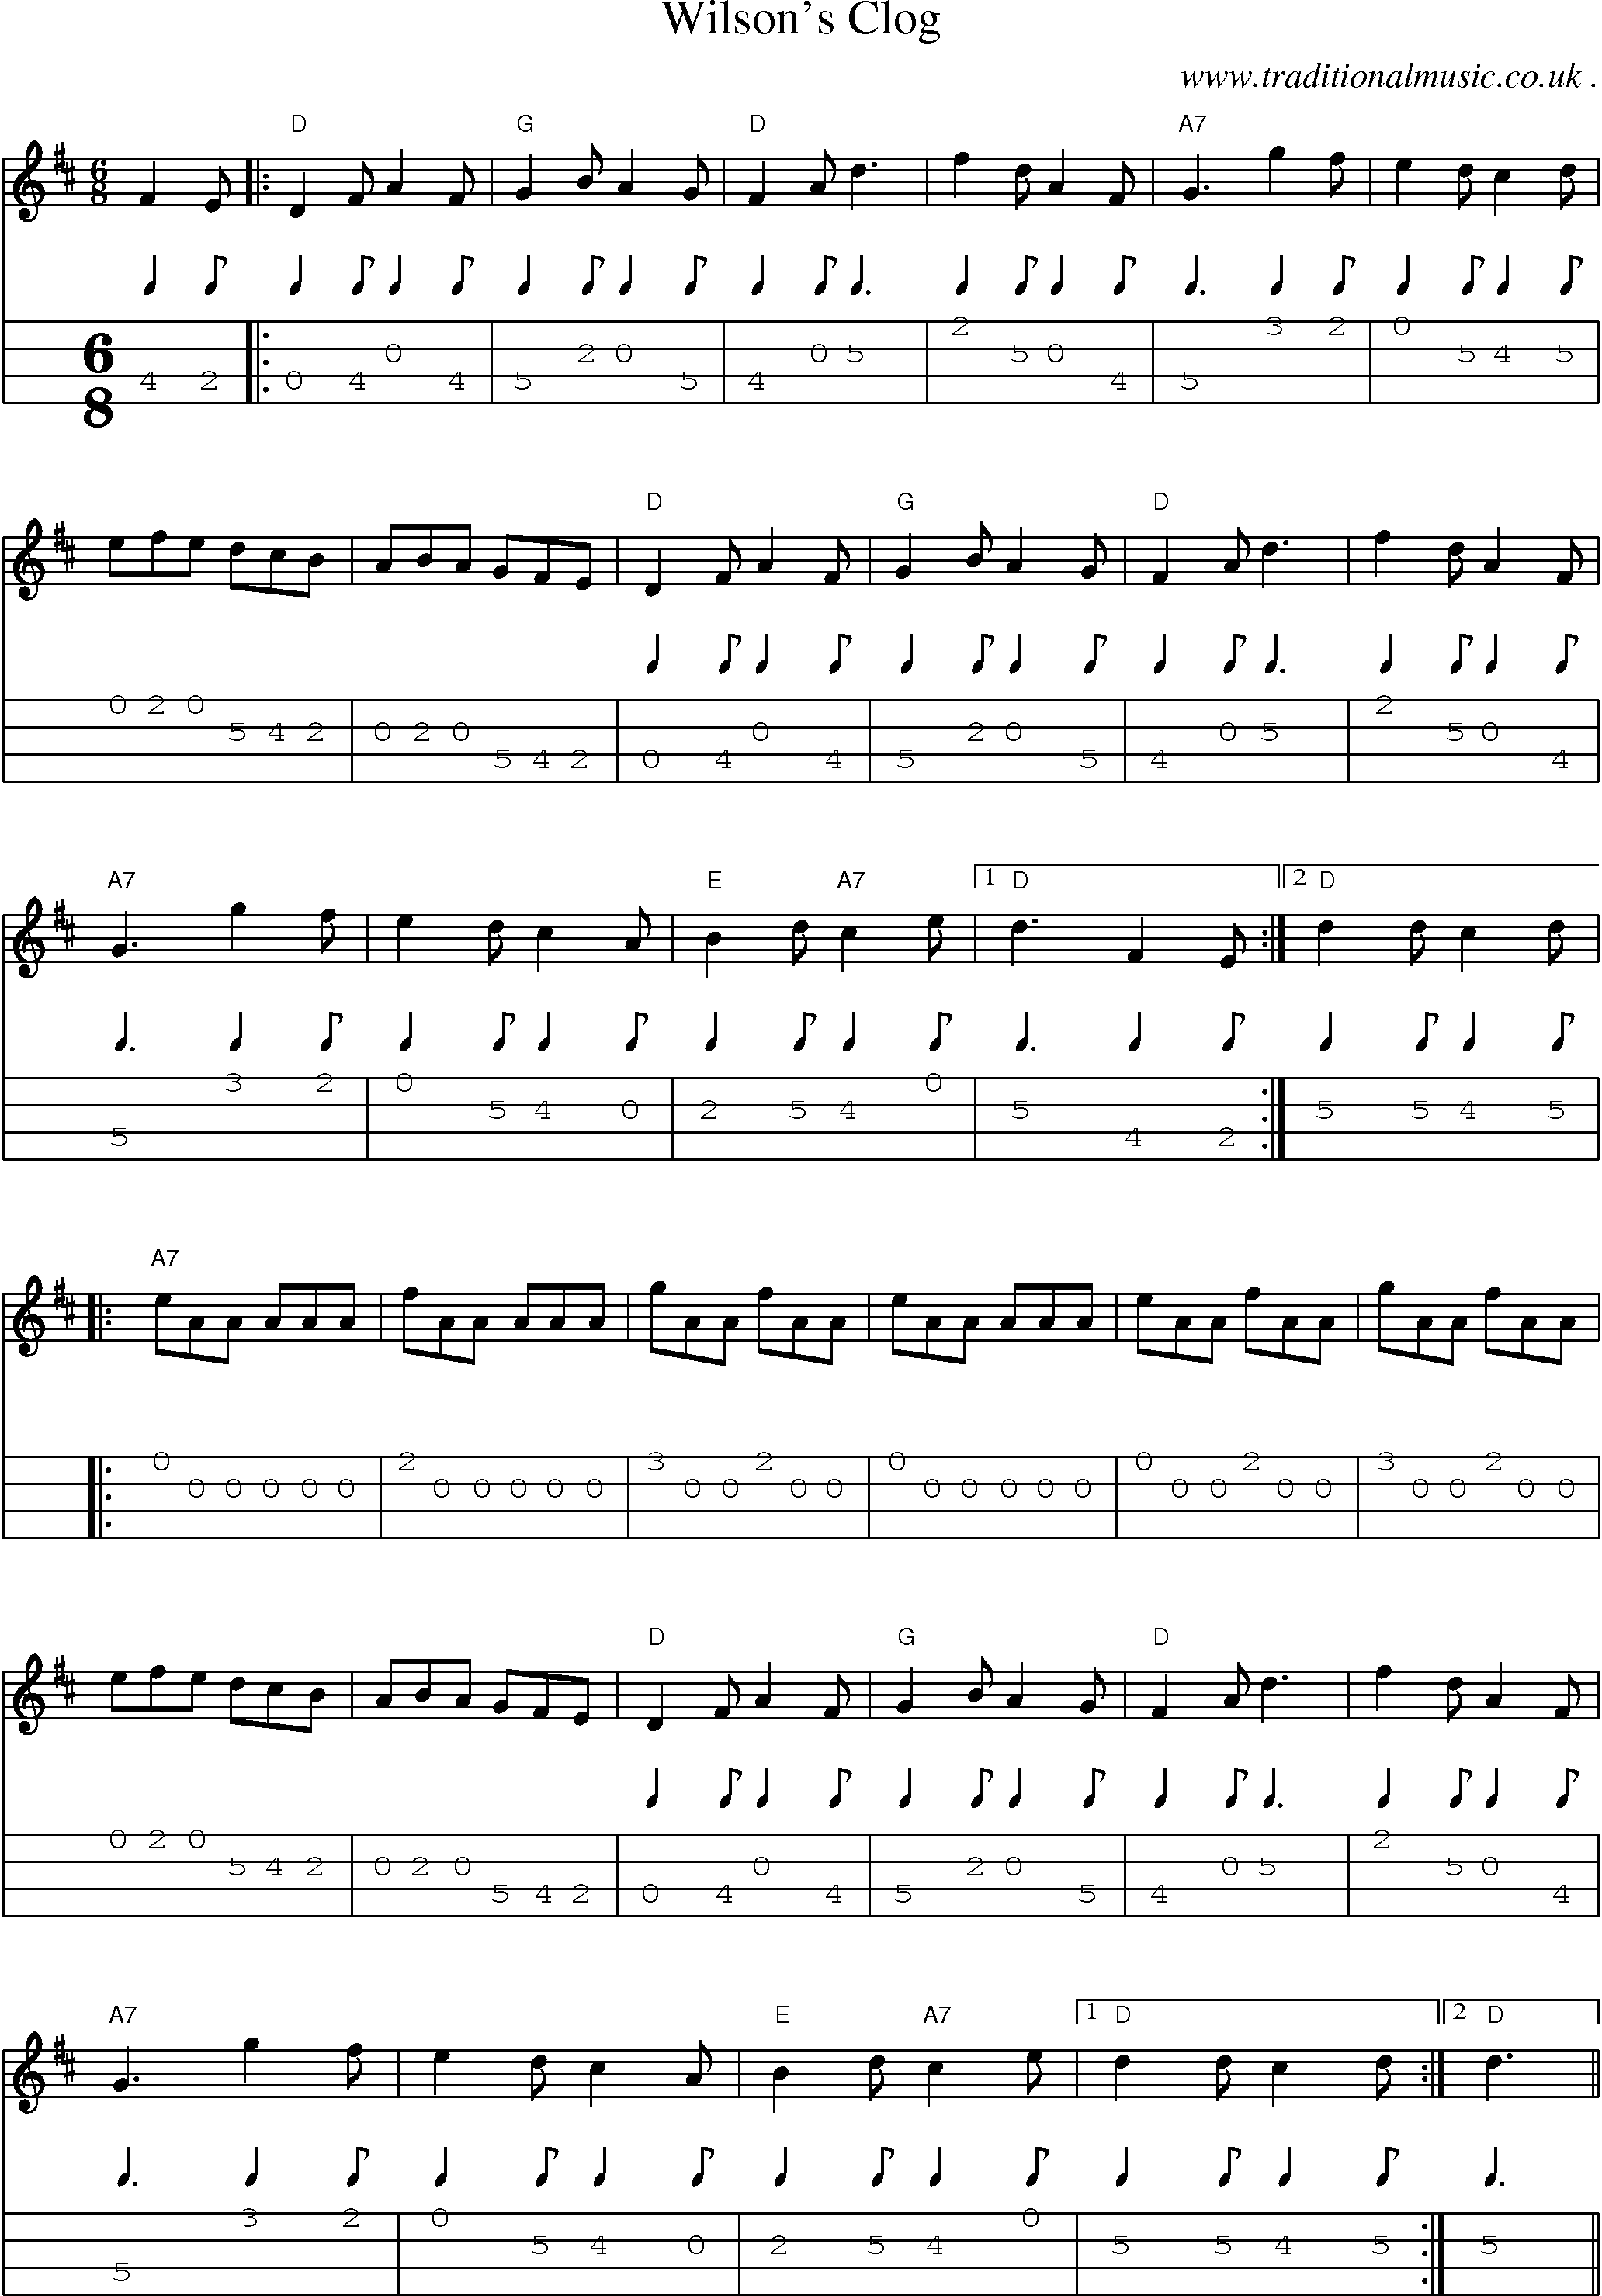 Sheet-Music and Mandolin Tabs for Wilsons Clog